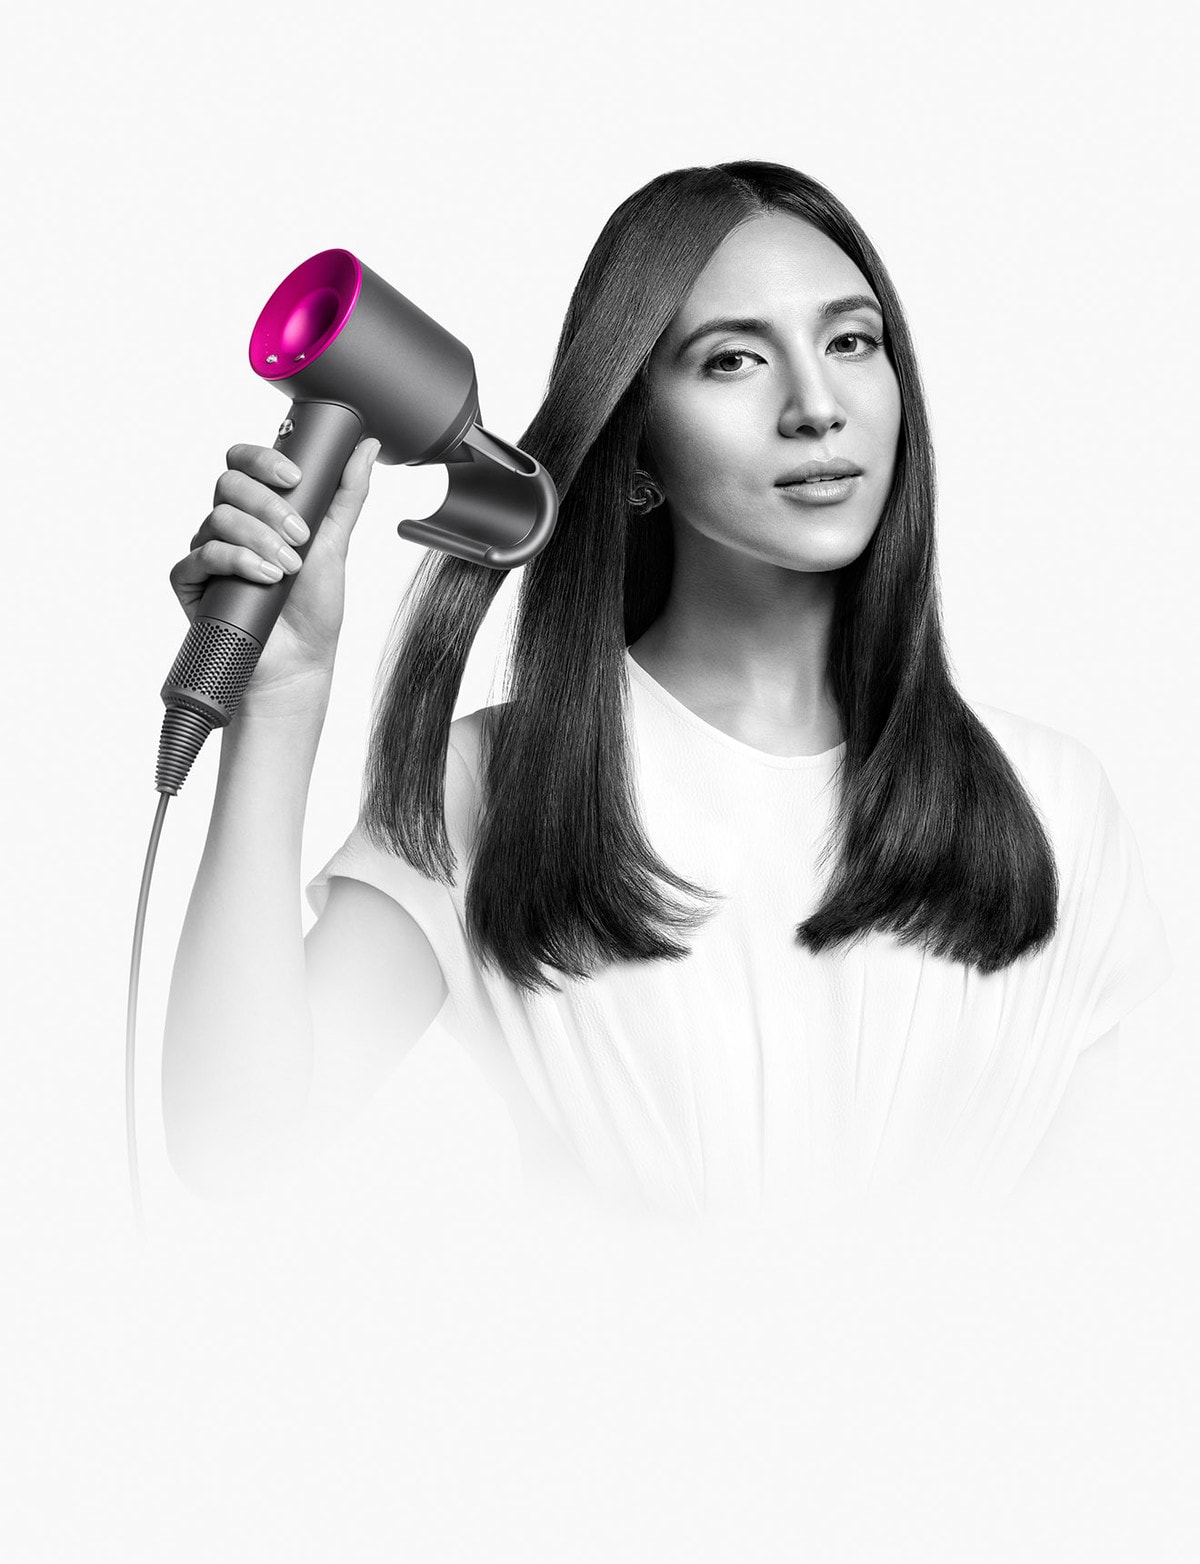  Dyson Supersonic Hair Dryer, Iron/Fuchsia : Beauty & Personal  Care